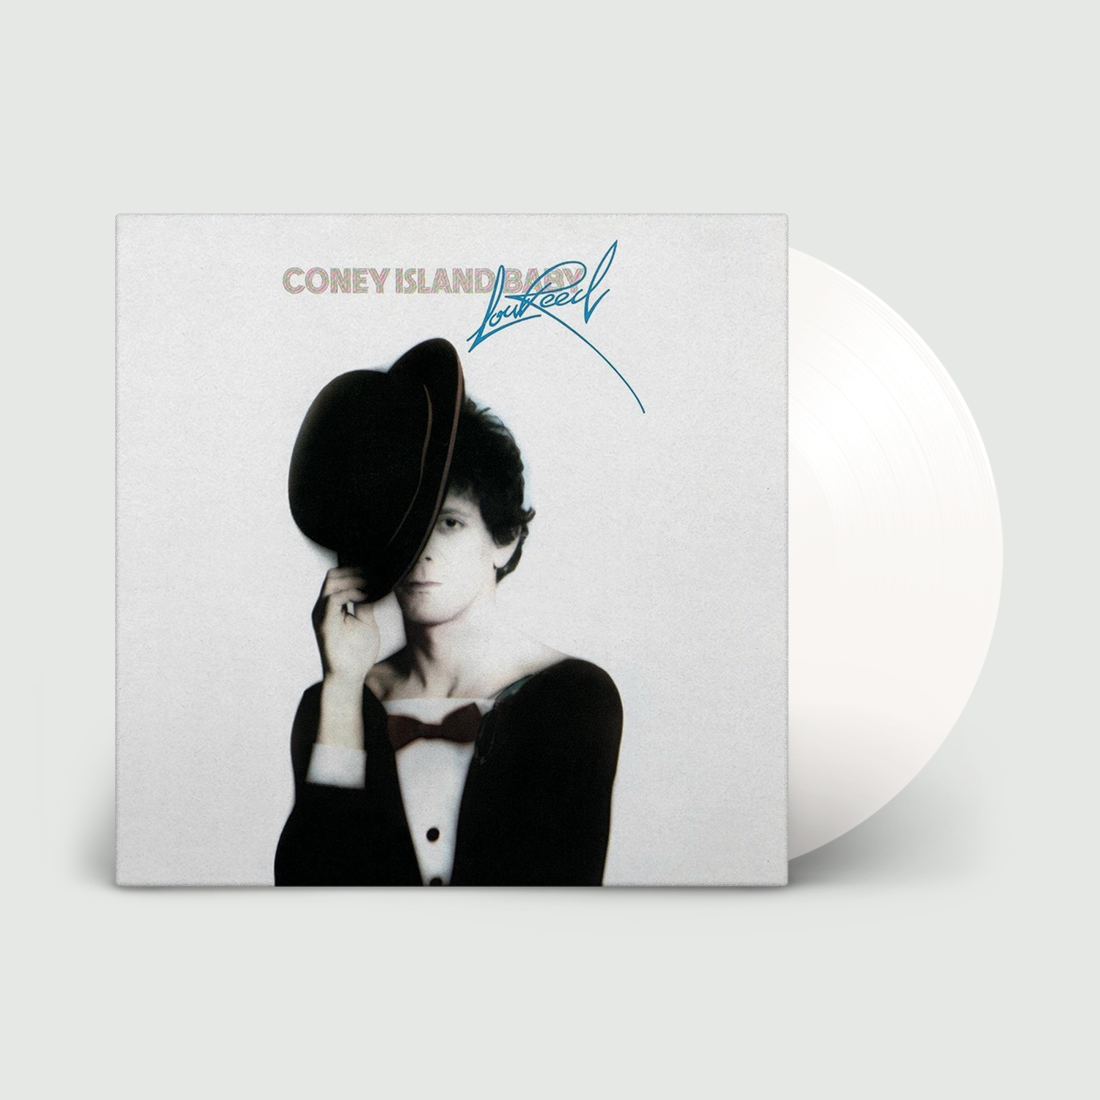 Lou Reed - Coney Island Baby: Limited Edition White Vinyl LP